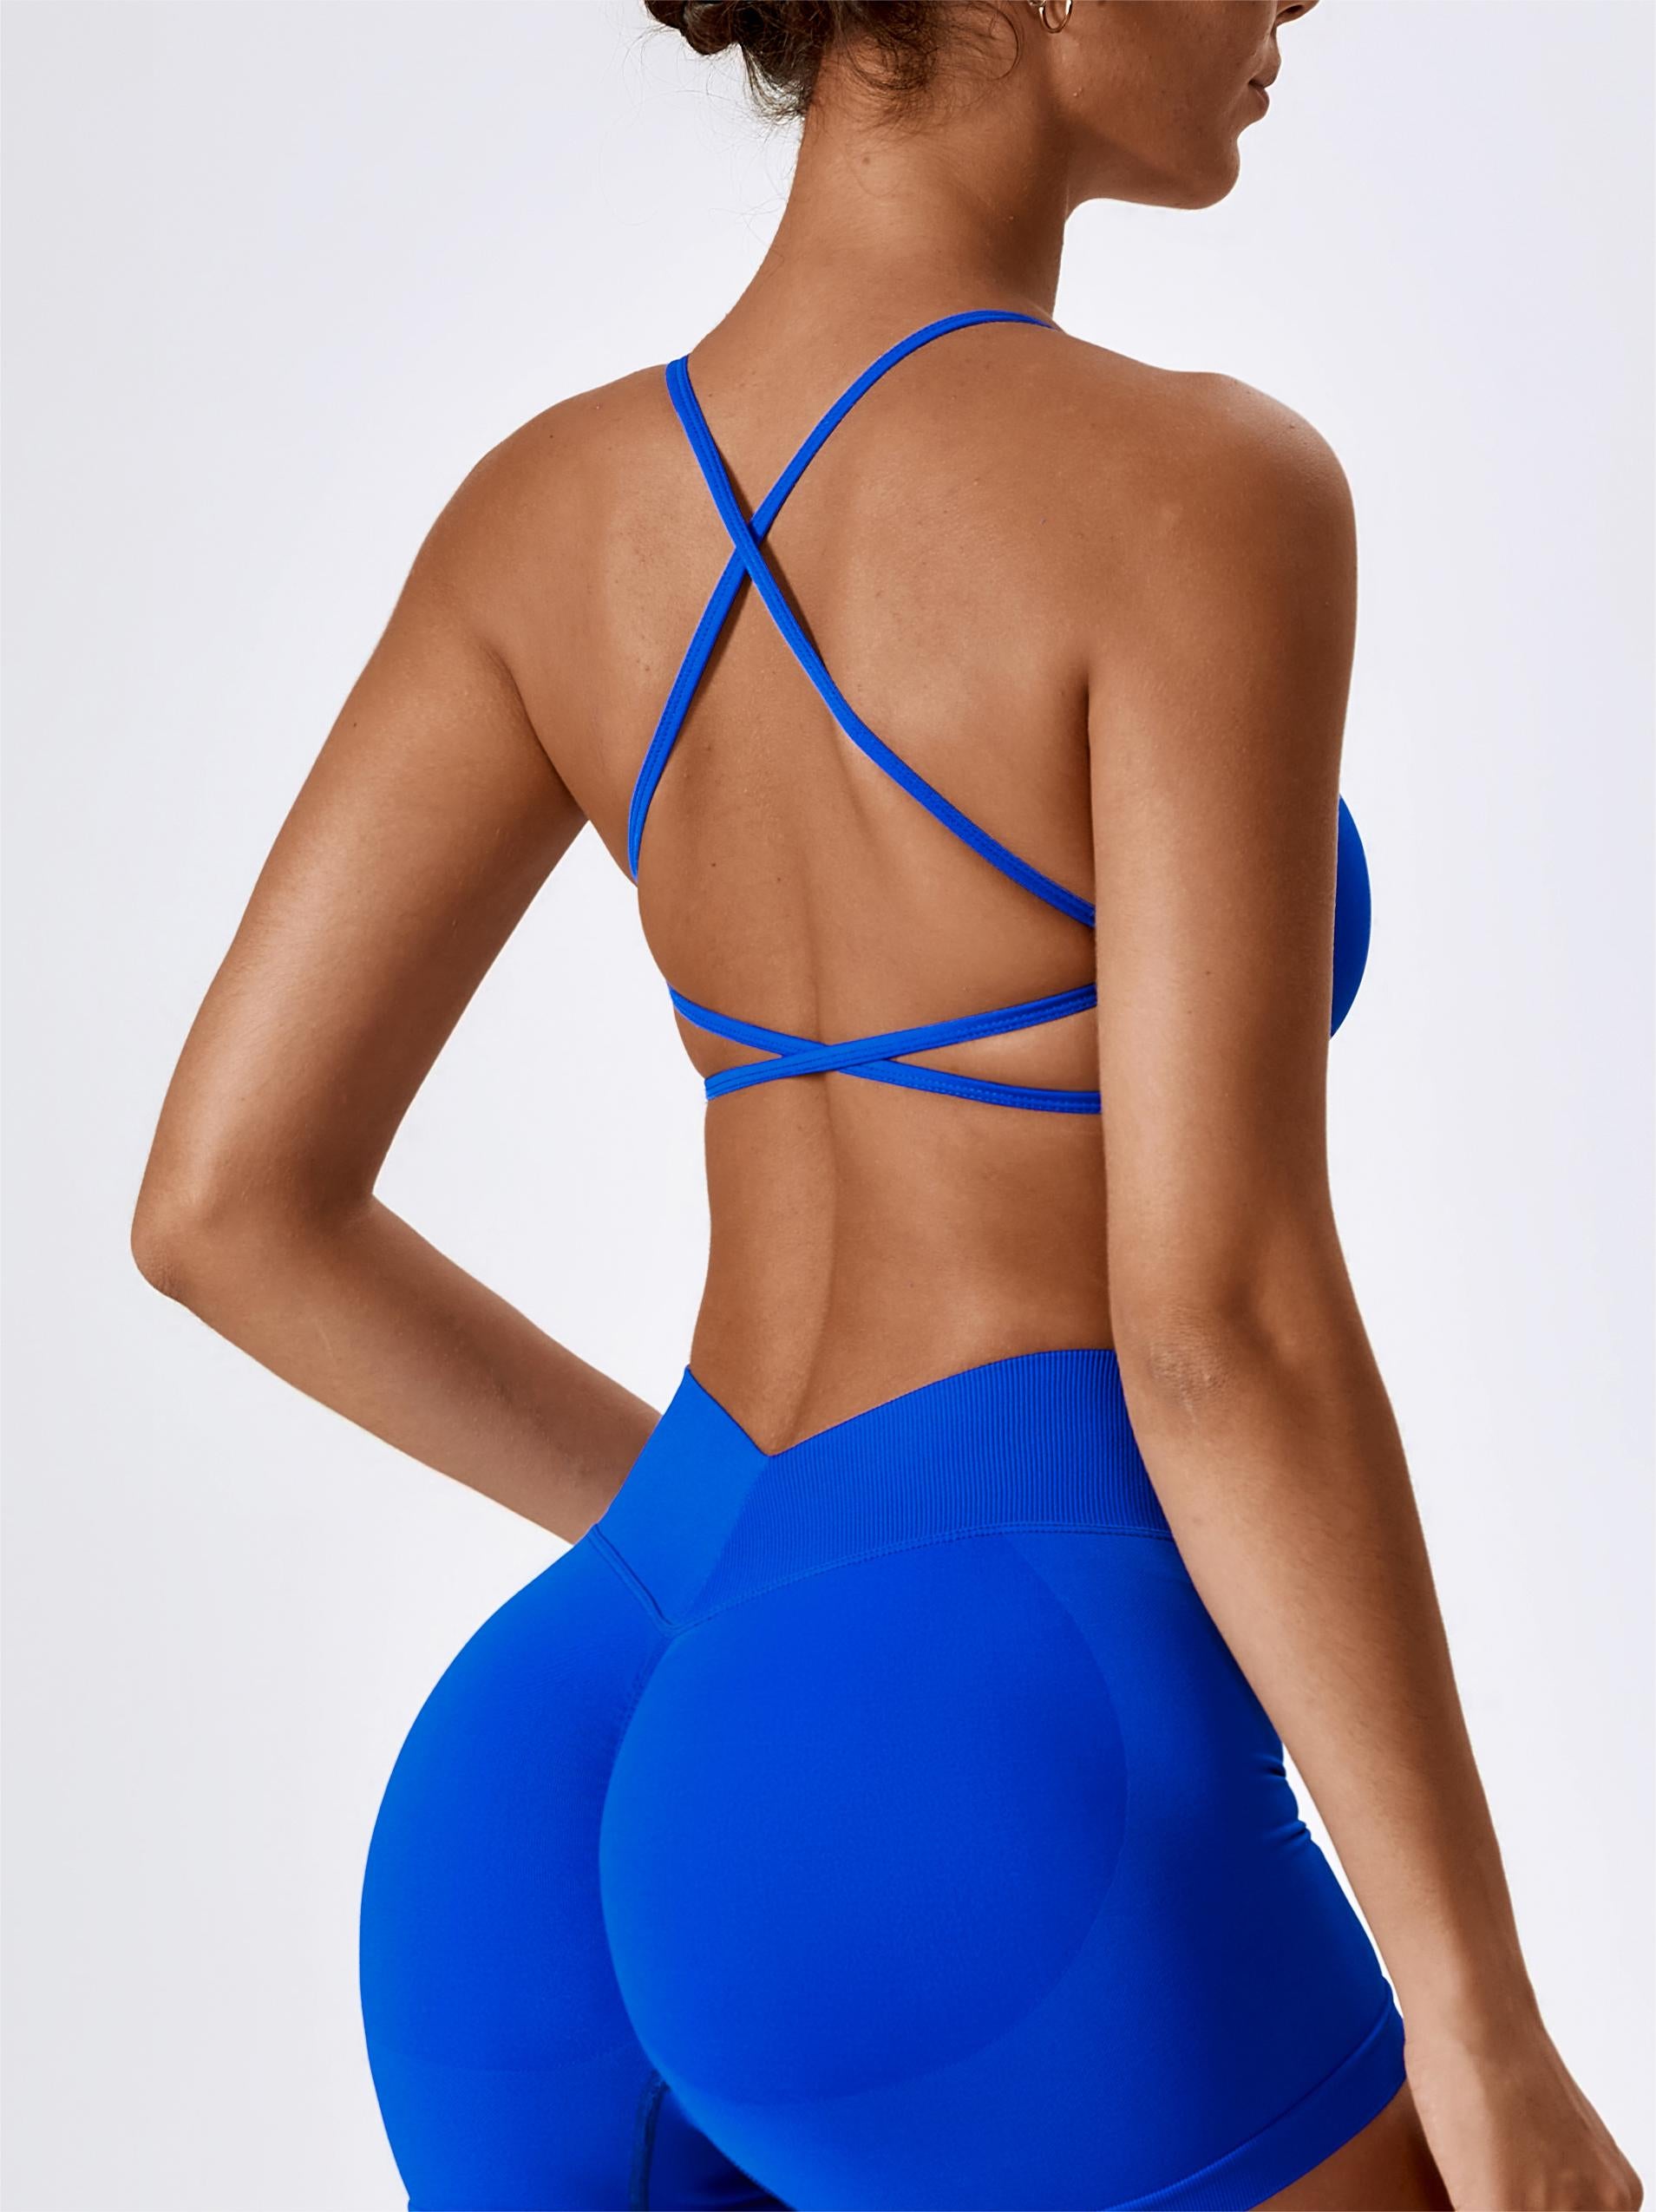 Strappy Twisted Sports Bra and Asymmetrical Leggings Set for Women – Zioccie